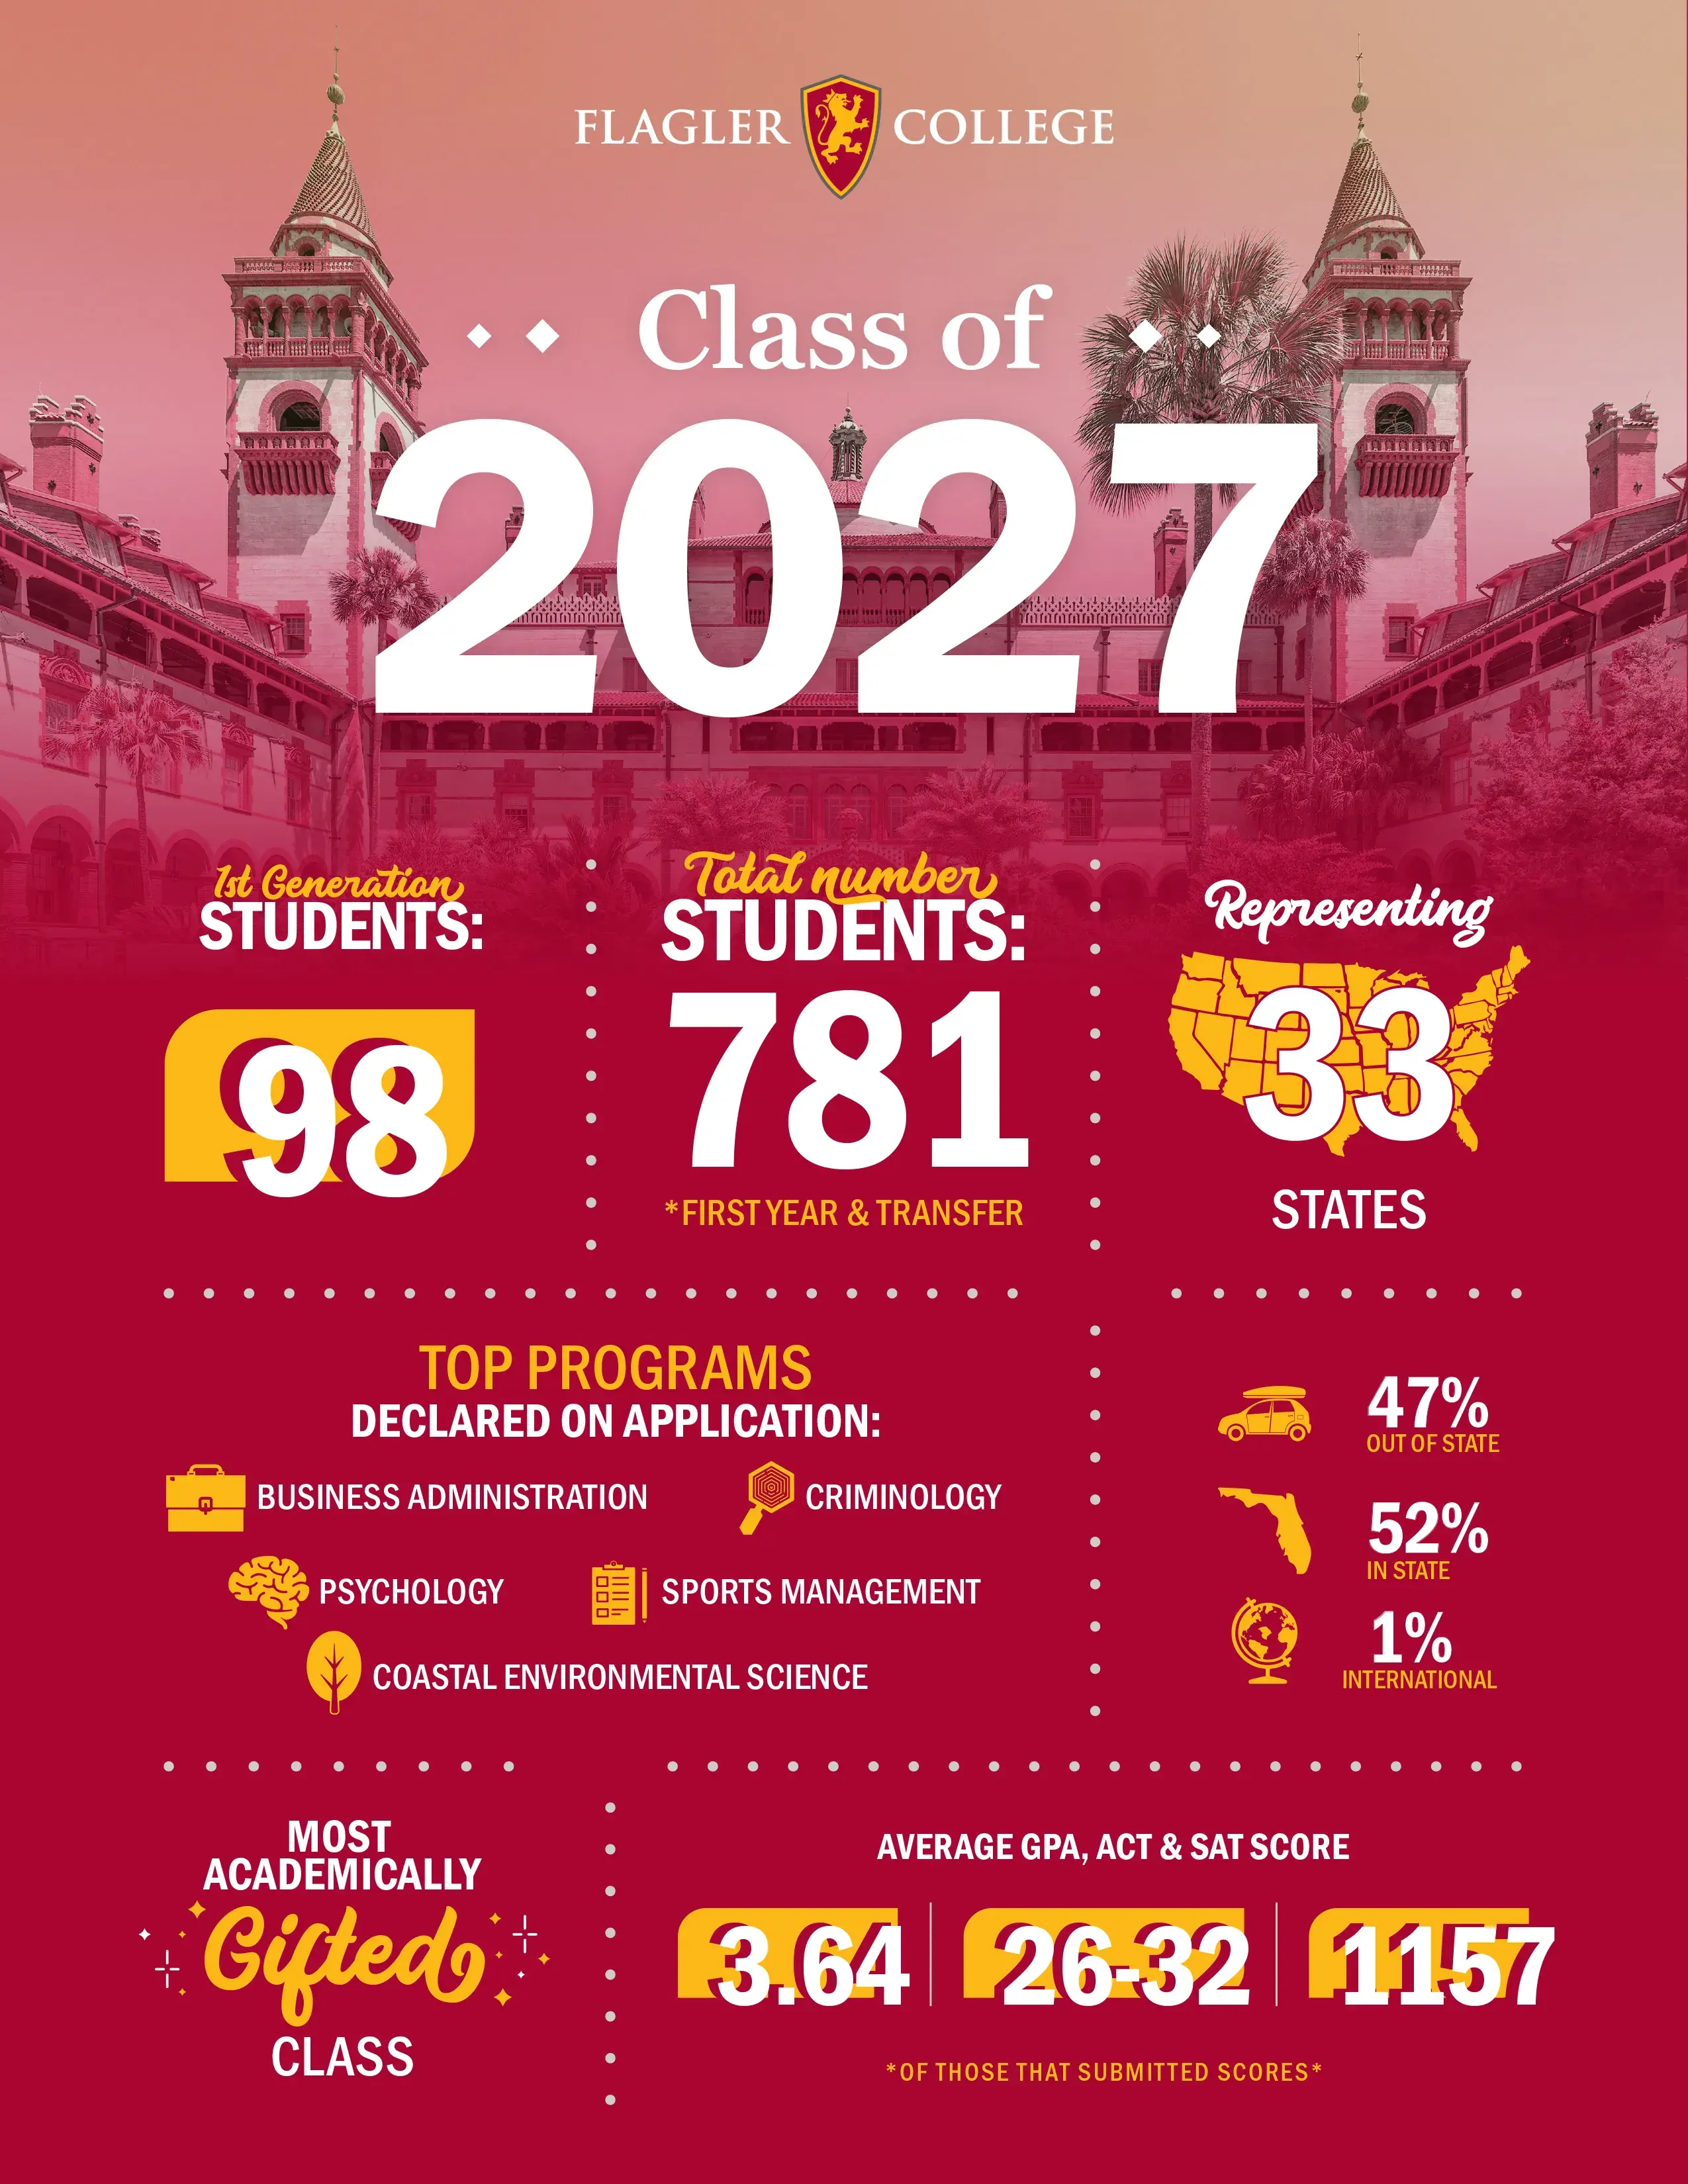 Large Inforgraphic. 98 first generation students. 781 total students representing 33 states. 47% out of stat, 52% in state, 1% International. Average GPA, ACT & SAT Score are 3.64, 26-32, and 1157 respectively.